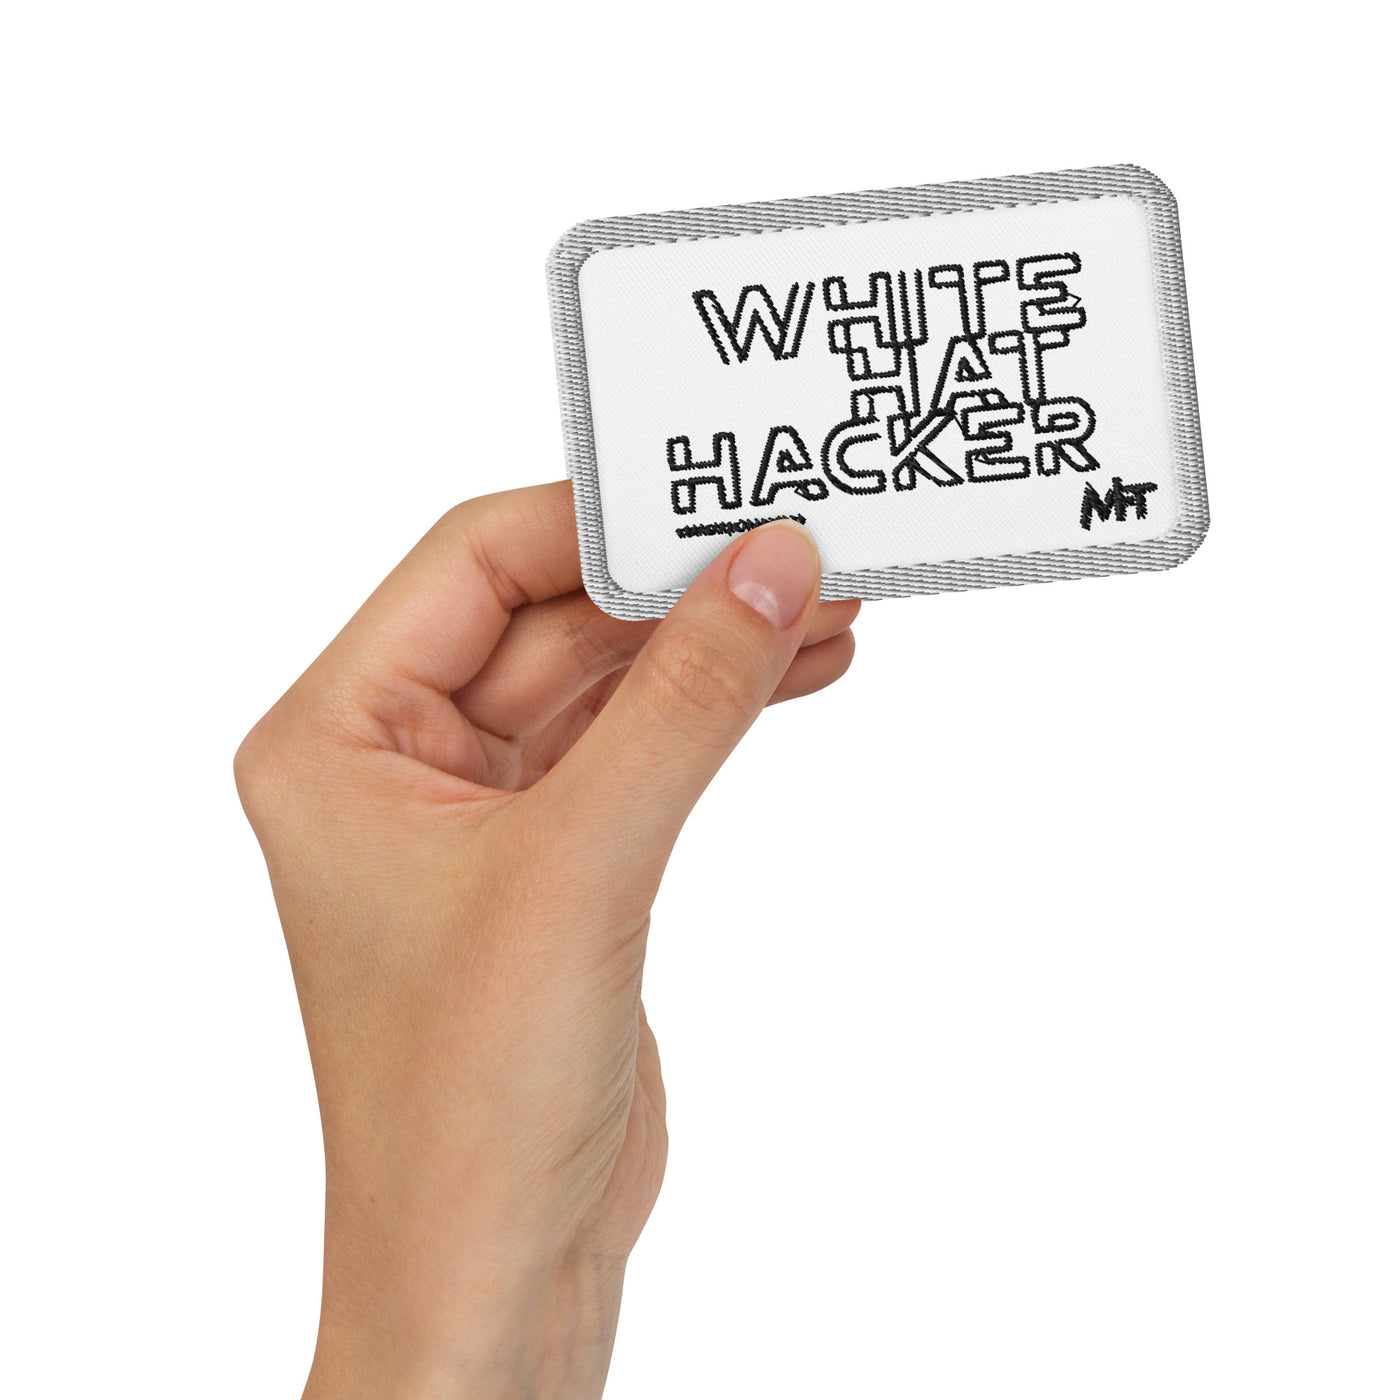 White Hat Hacker - Embroidered patches